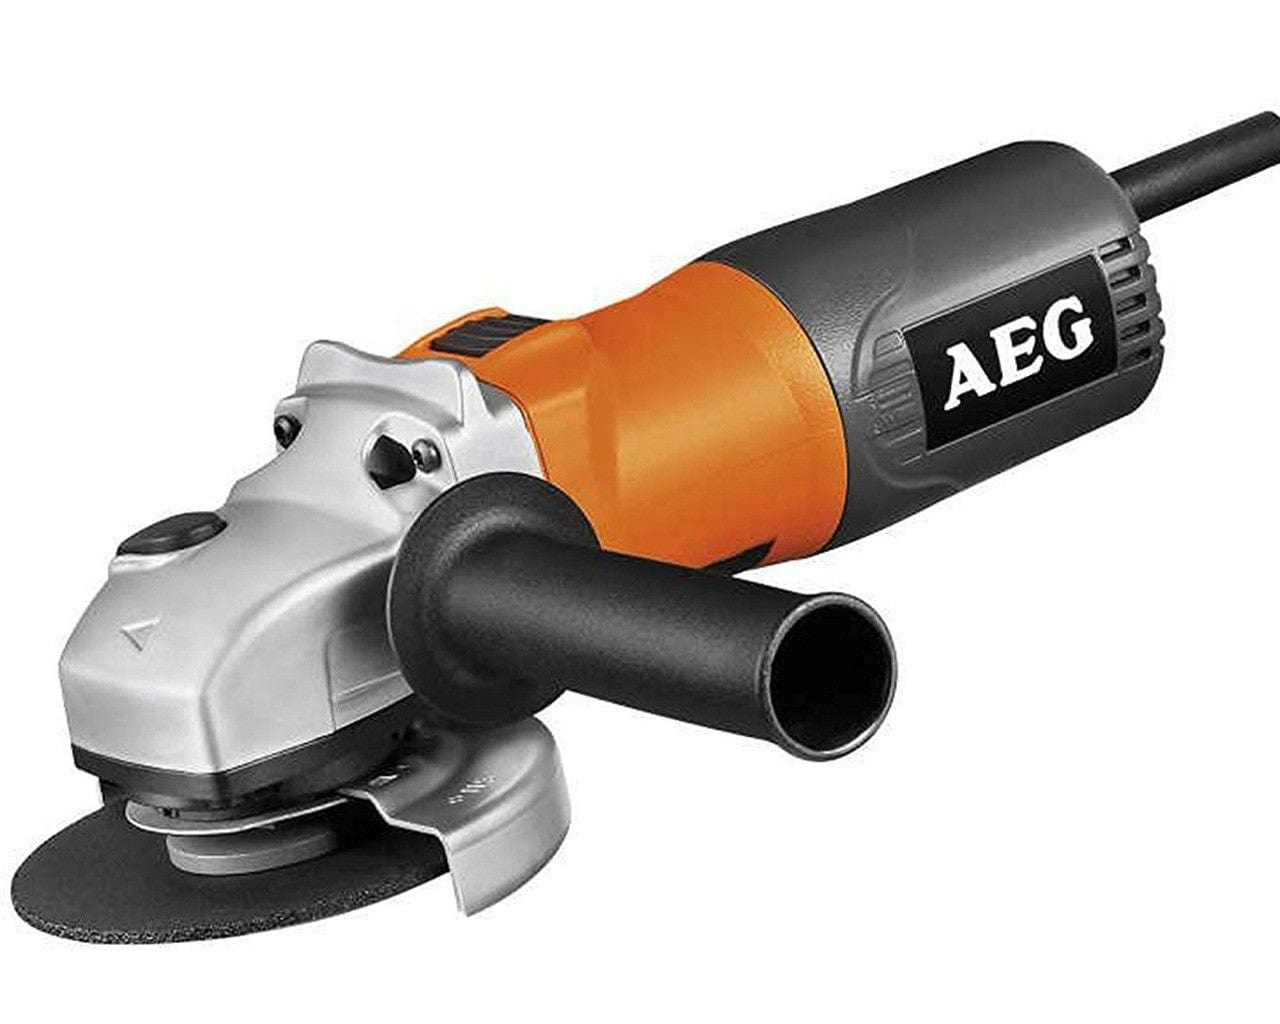 AEG 4.5"/115mm Angle Grinder 800W - WS8-115 | Supply Master | Accra, Ghana Grinder Buy Tools hardware Building materials